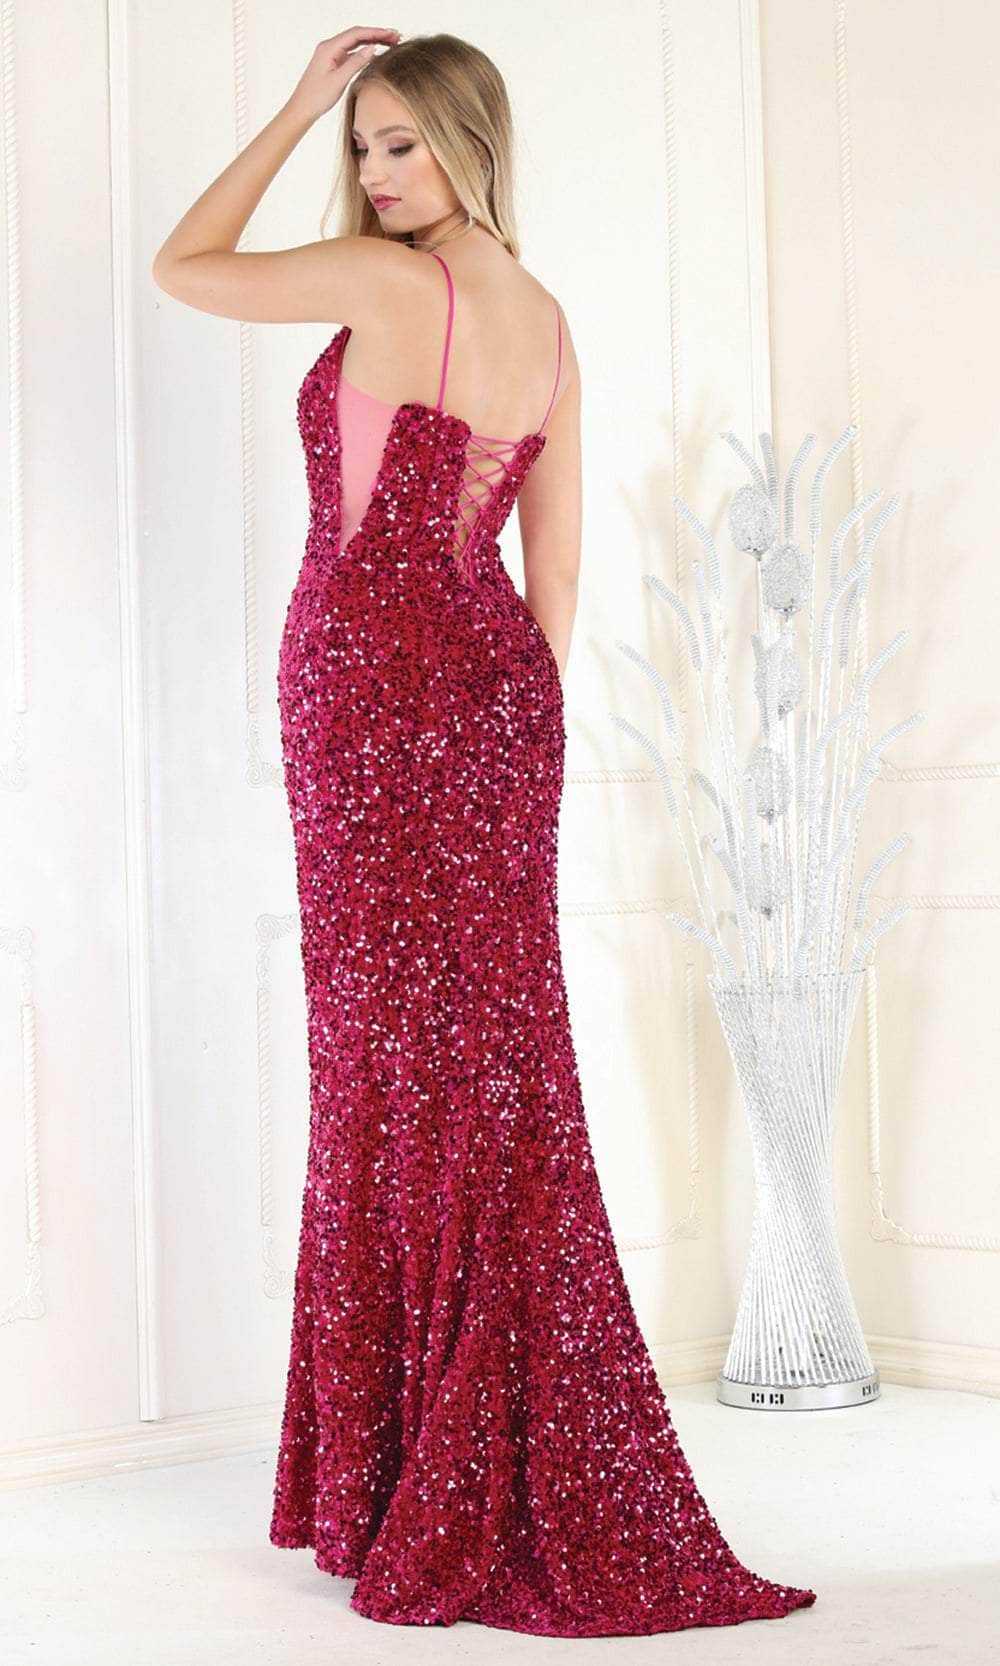 May Queen, May Queen RQ7987 - Sequin Embellished Sleeveless Evening Dress